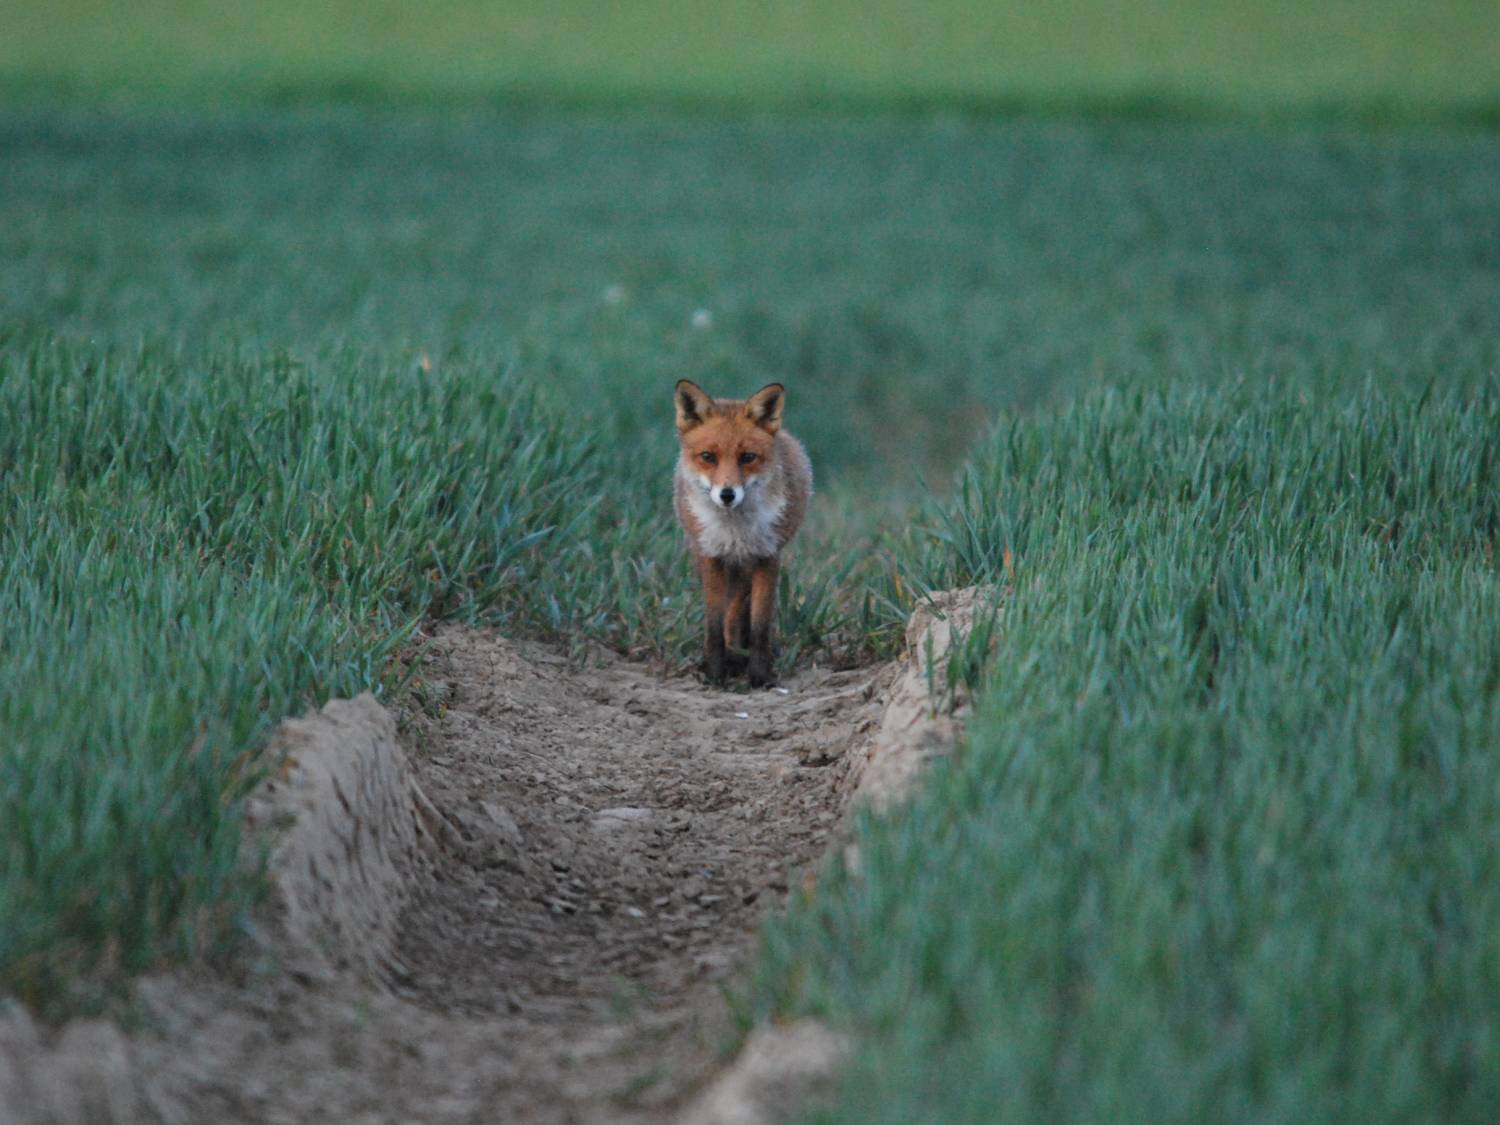 Fox out and about on the prowl